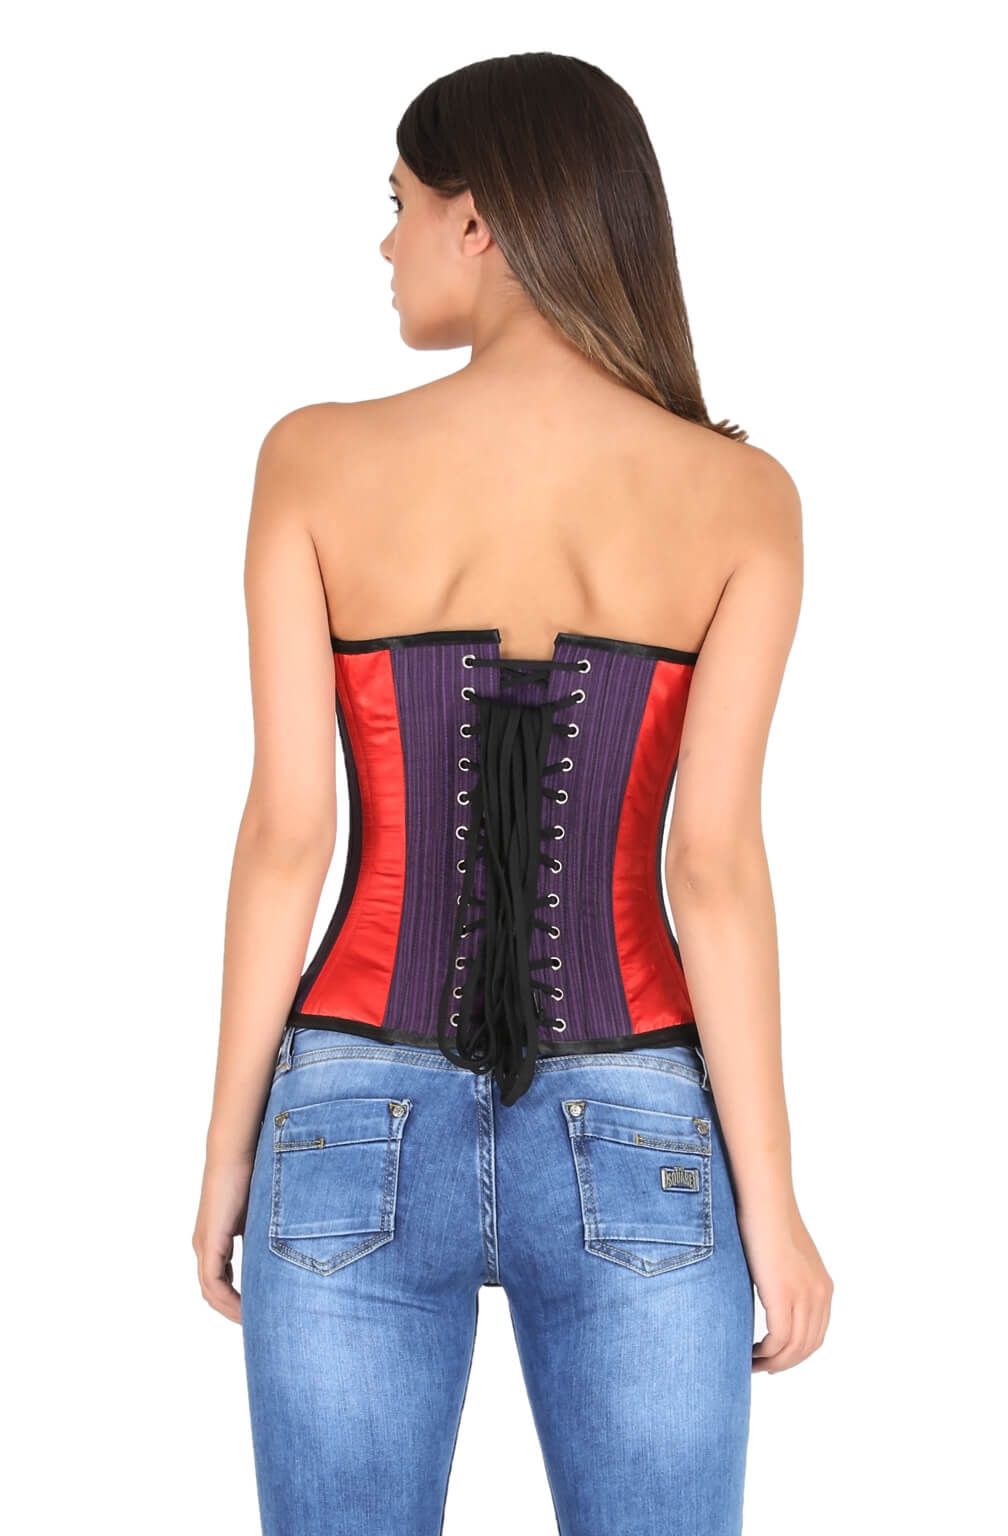 Red Purple Satin with Burlesque Bustier Overbust Corset Top – CorsetsNmore